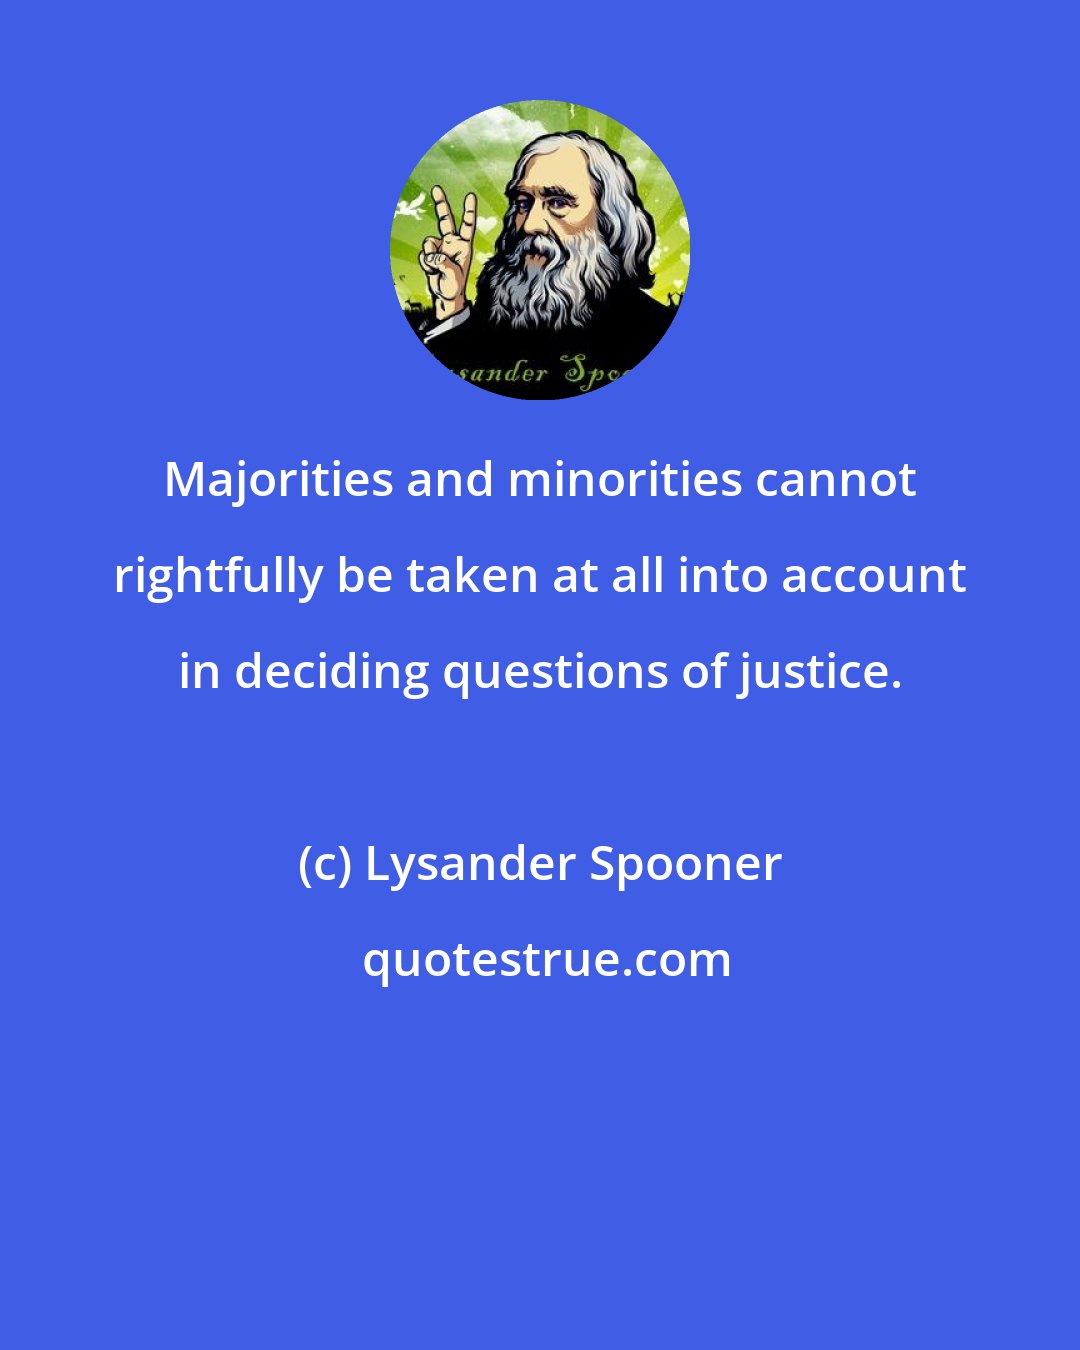 Lysander Spooner: Majorities and minorities cannot rightfully be taken at all into account in deciding questions of justice.